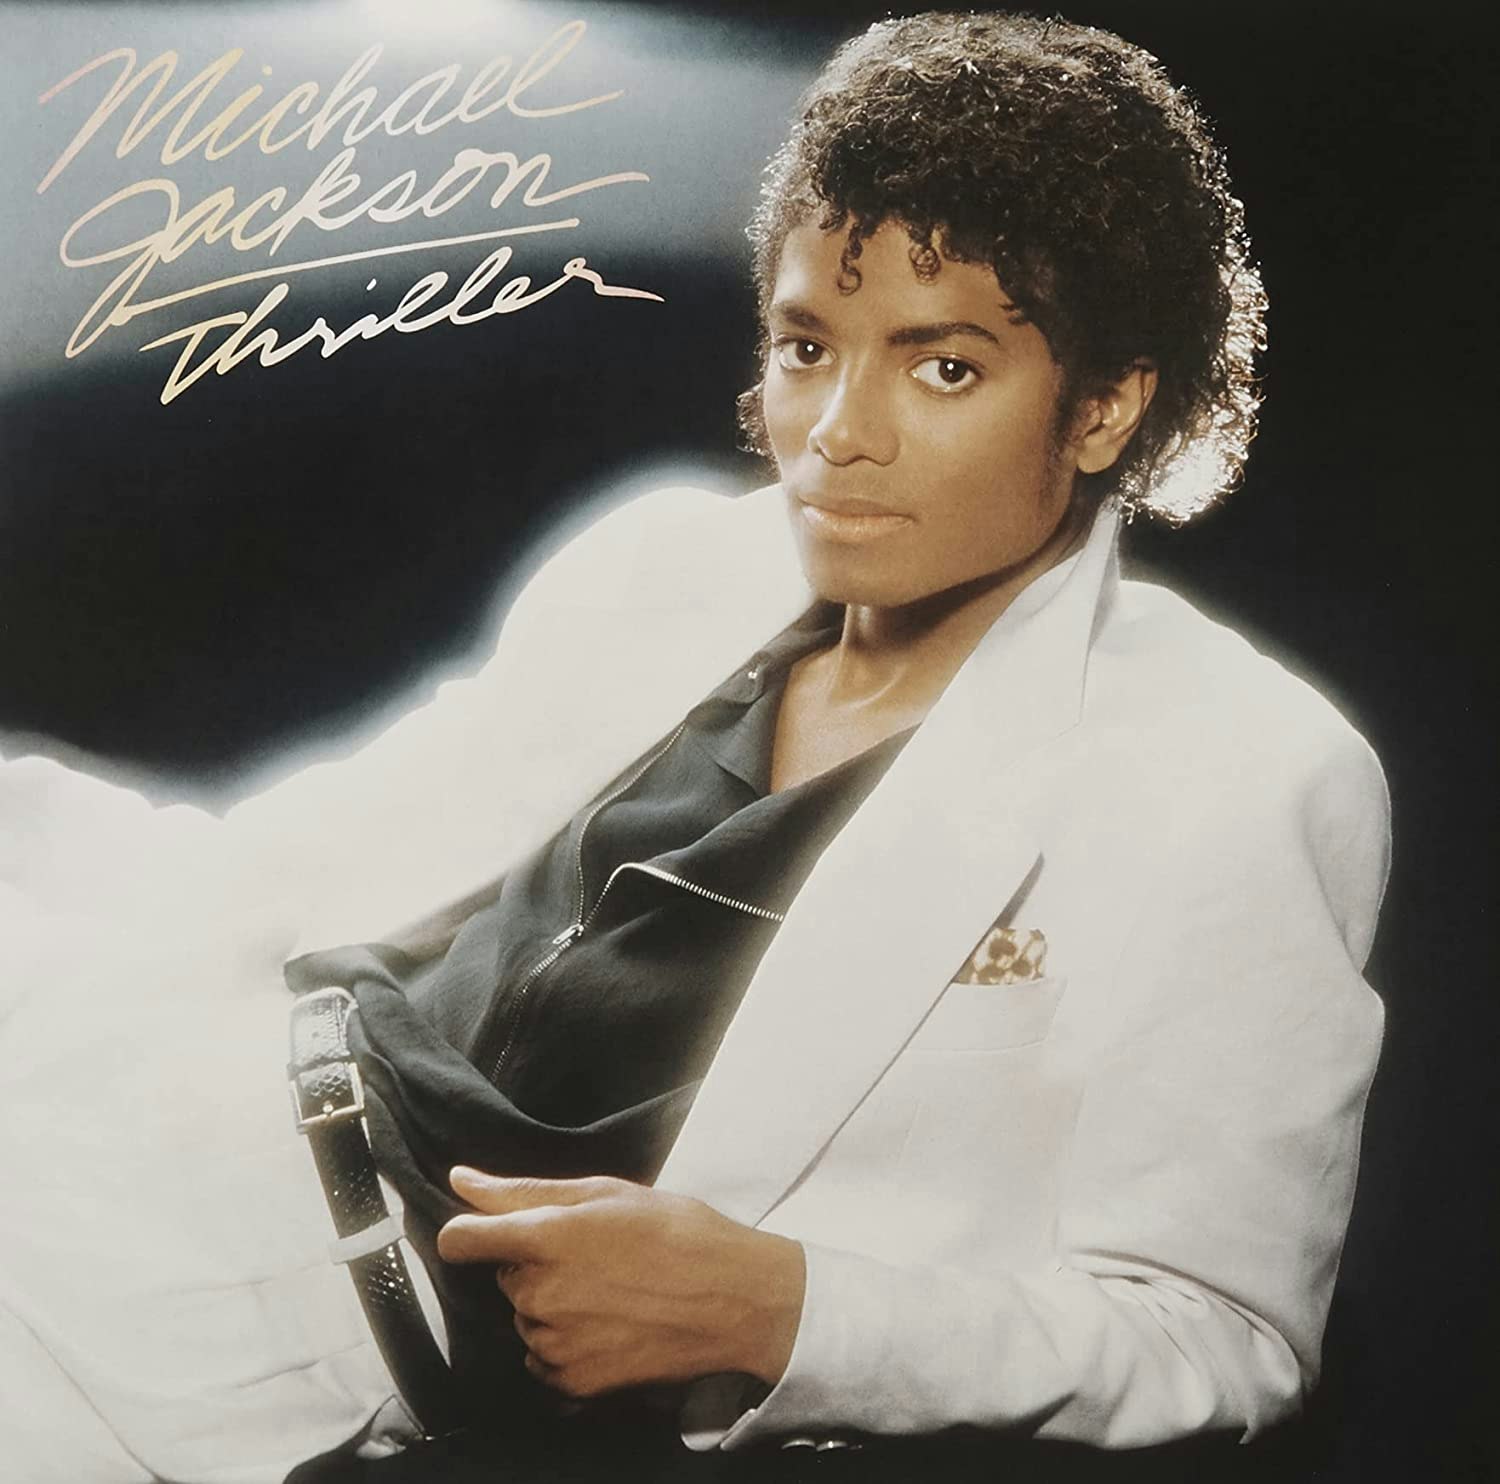 Released November 30, 1982 from Thriller. This is Michael Jackson's sixth studio album.